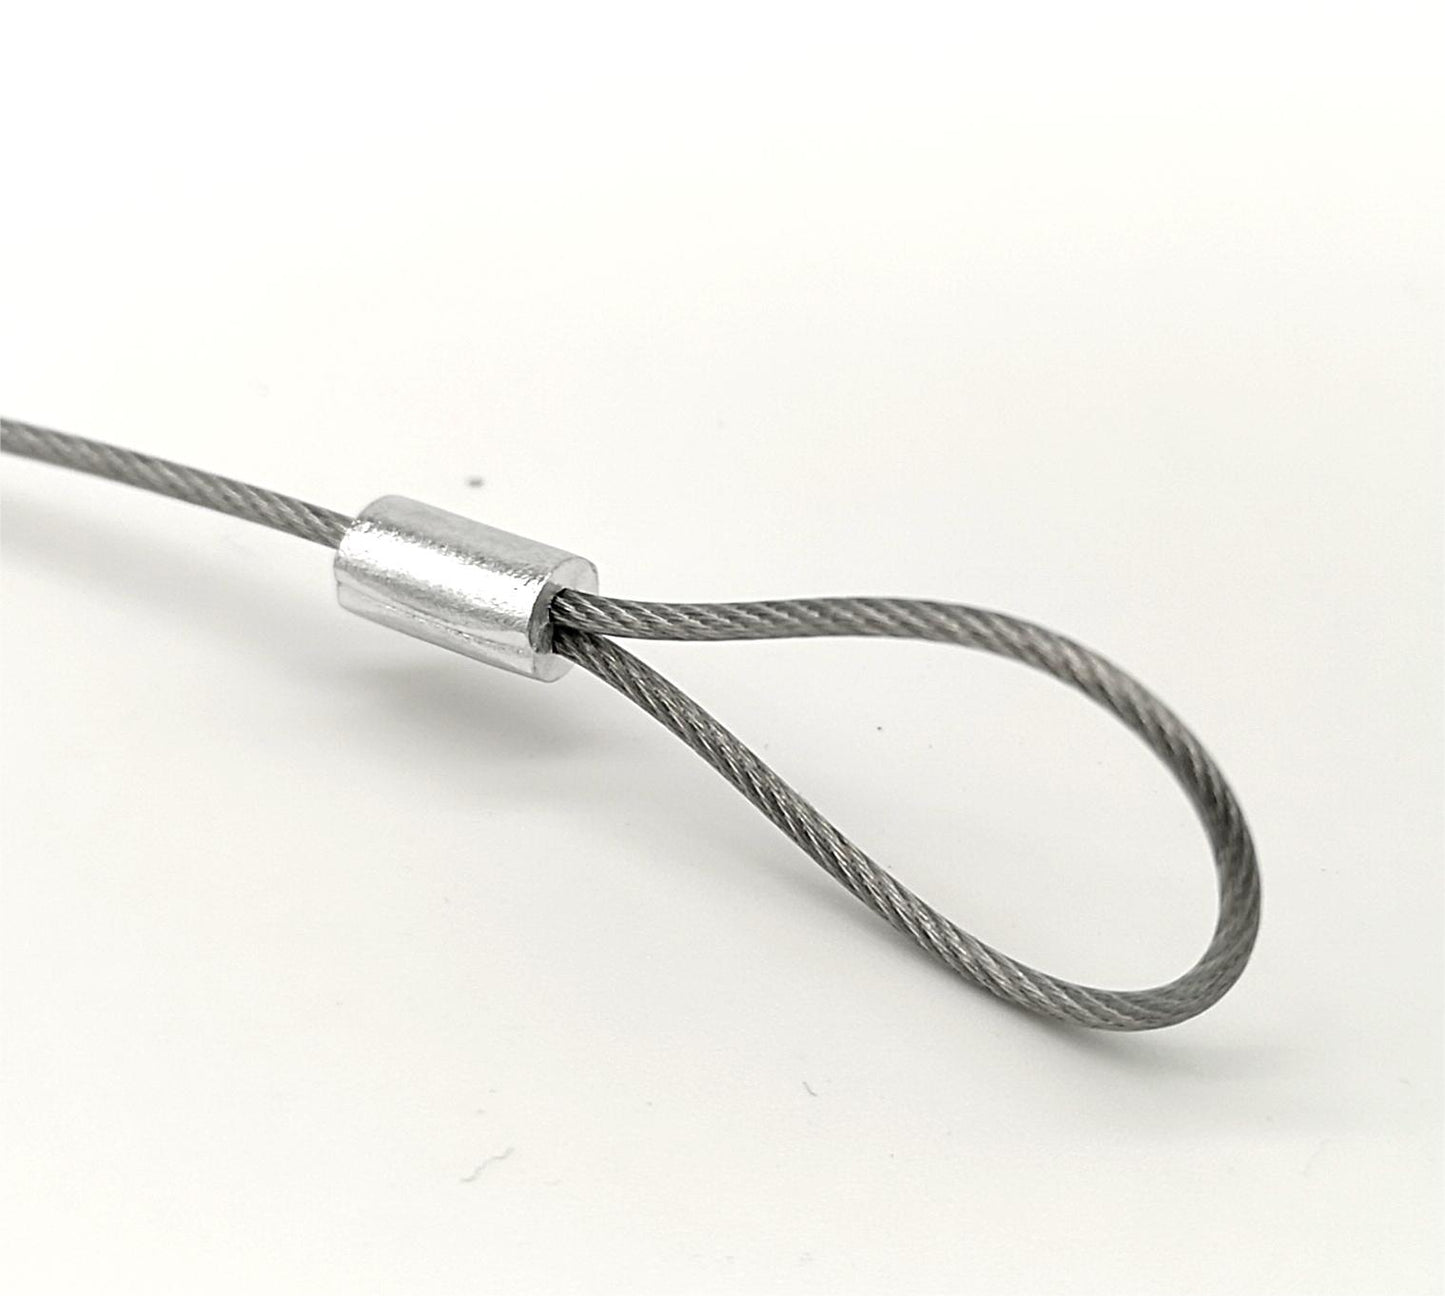 Safety Pin incl. Safety Wire